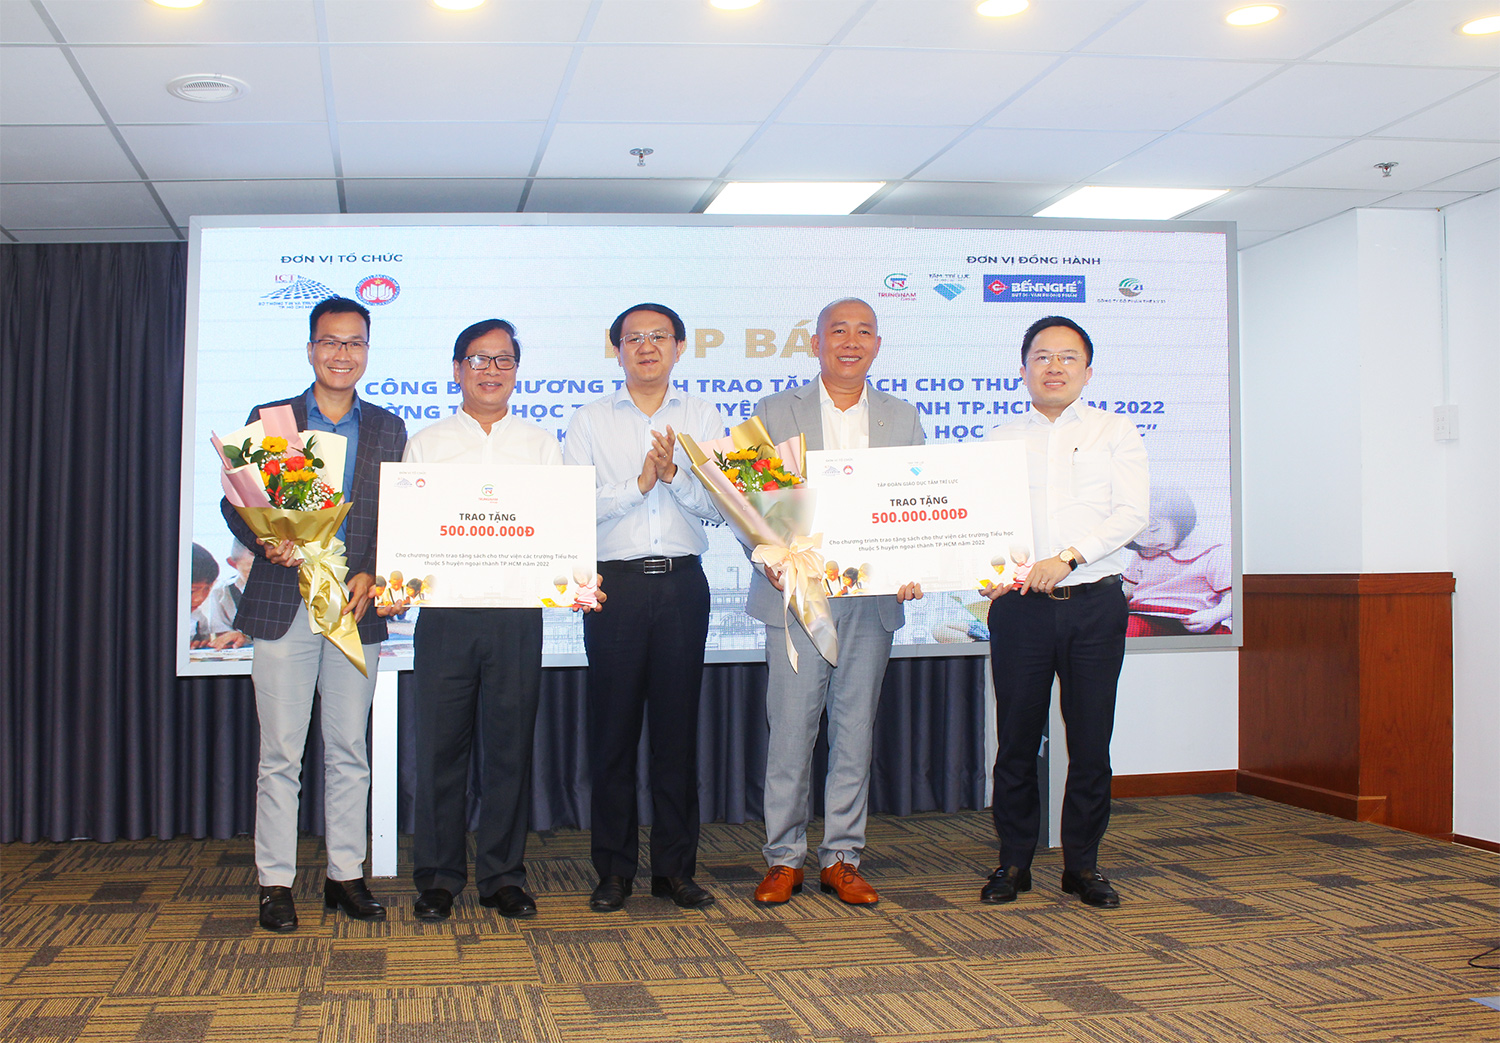 TRUNGNAM GROUP SPONSORED 500 MILLION FOR 50 ELEMENTARY SCHOOLS IN HO CHI MINH CITY